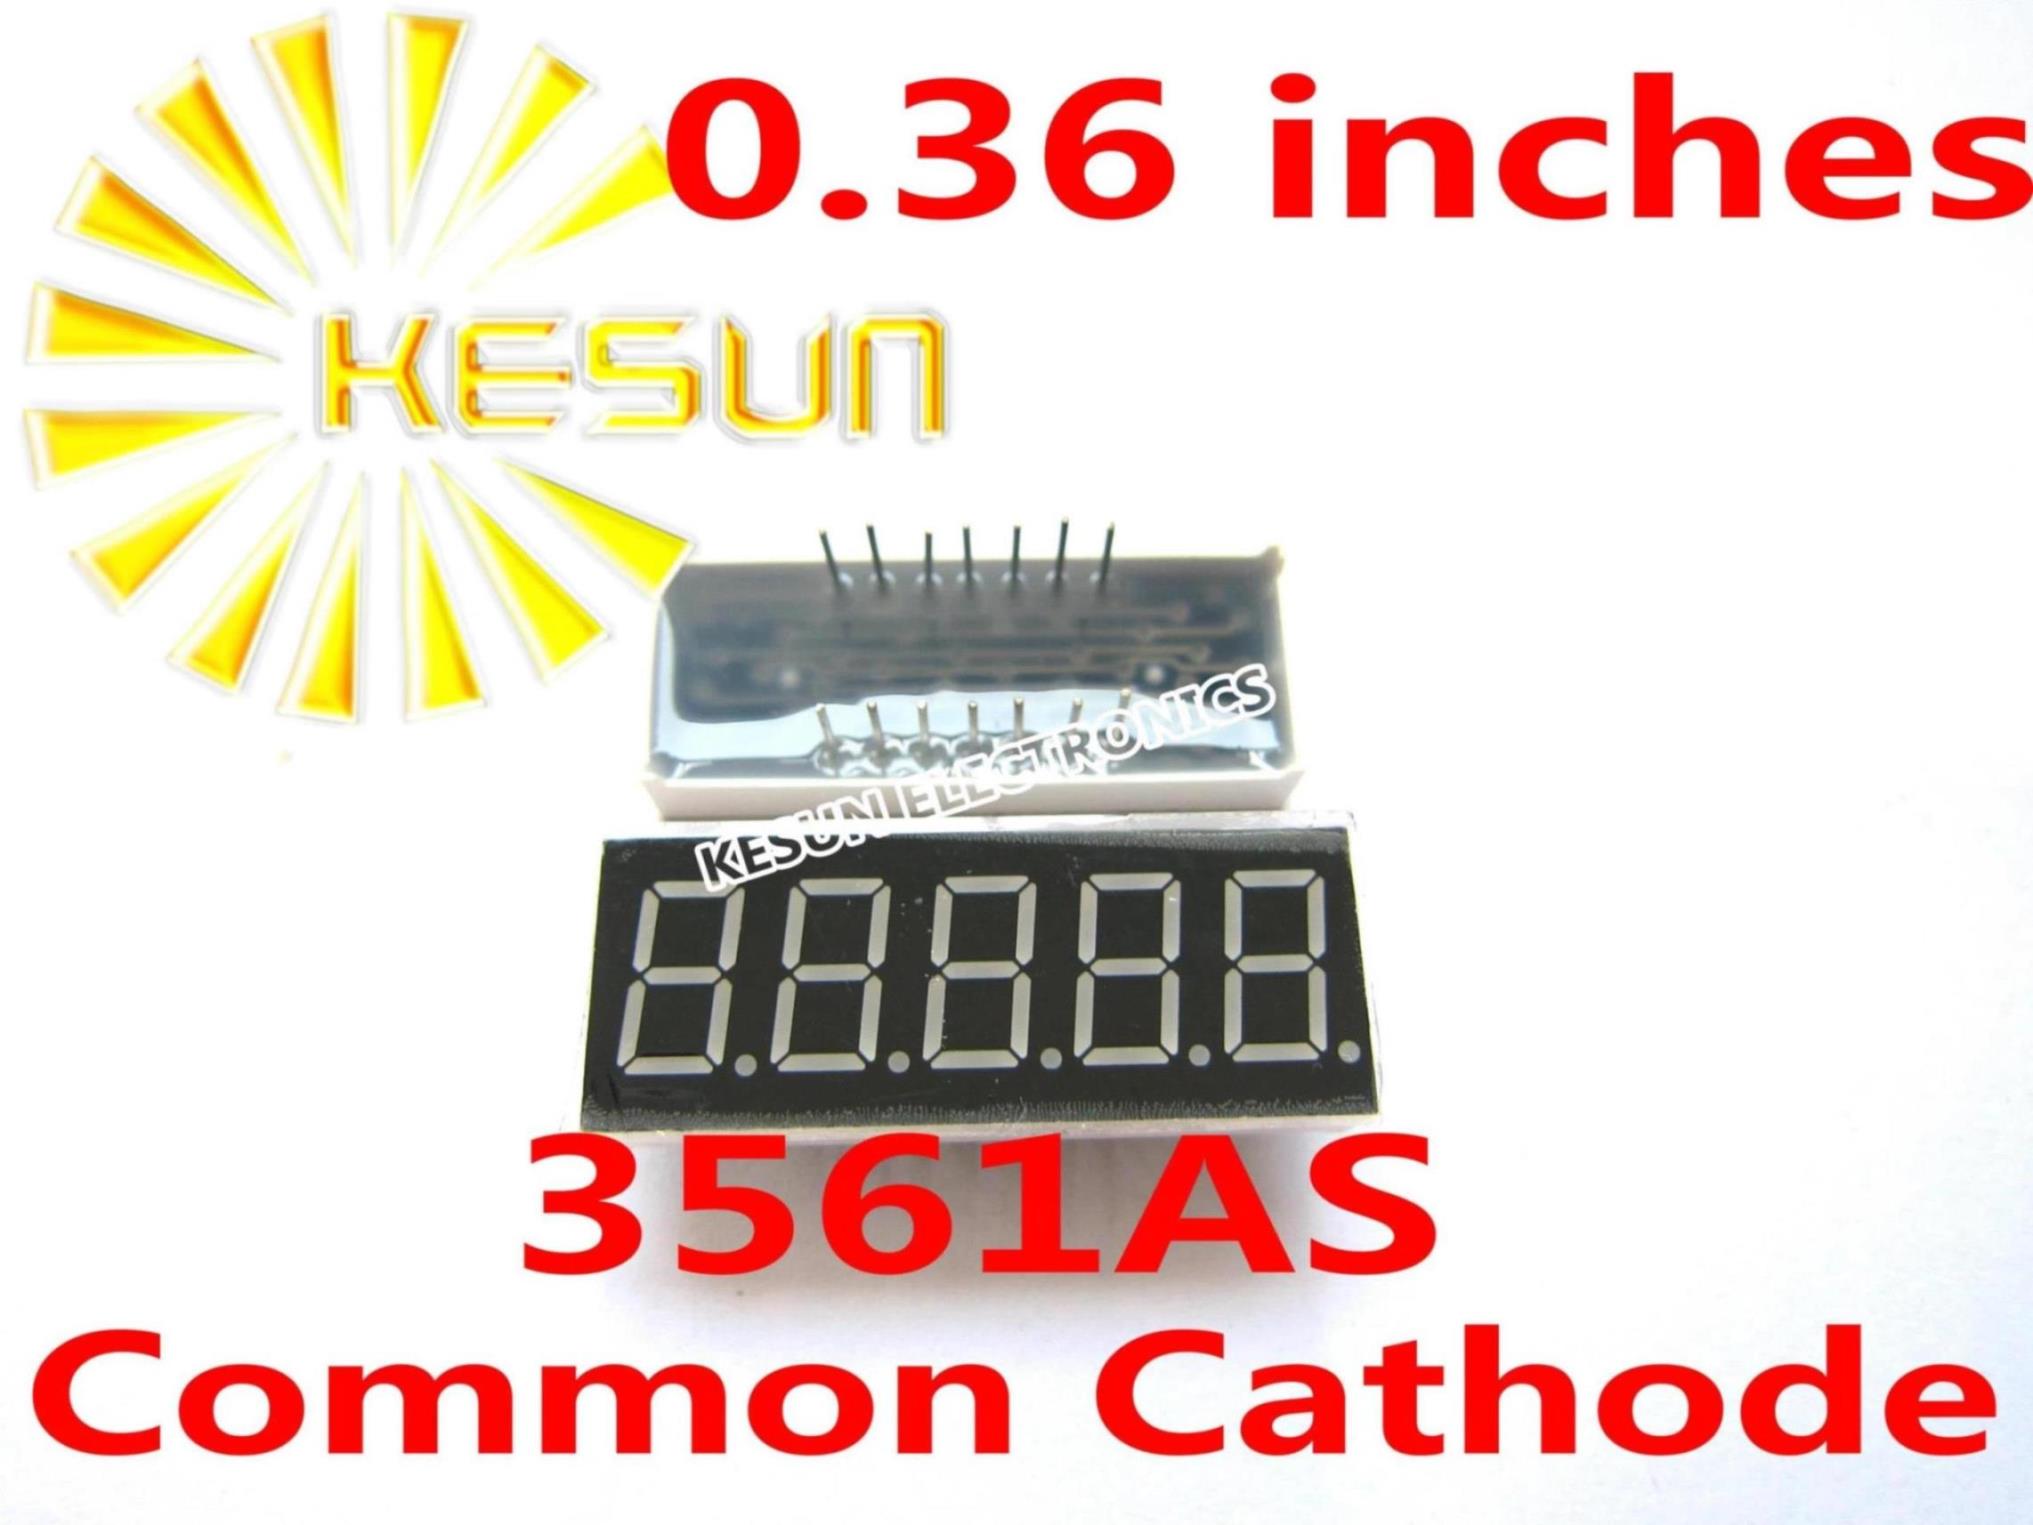 5PCS x 0.36 inches Red Common Cathode/Anode 5 Digital Tube 3561AS 3561BS LED Display Module